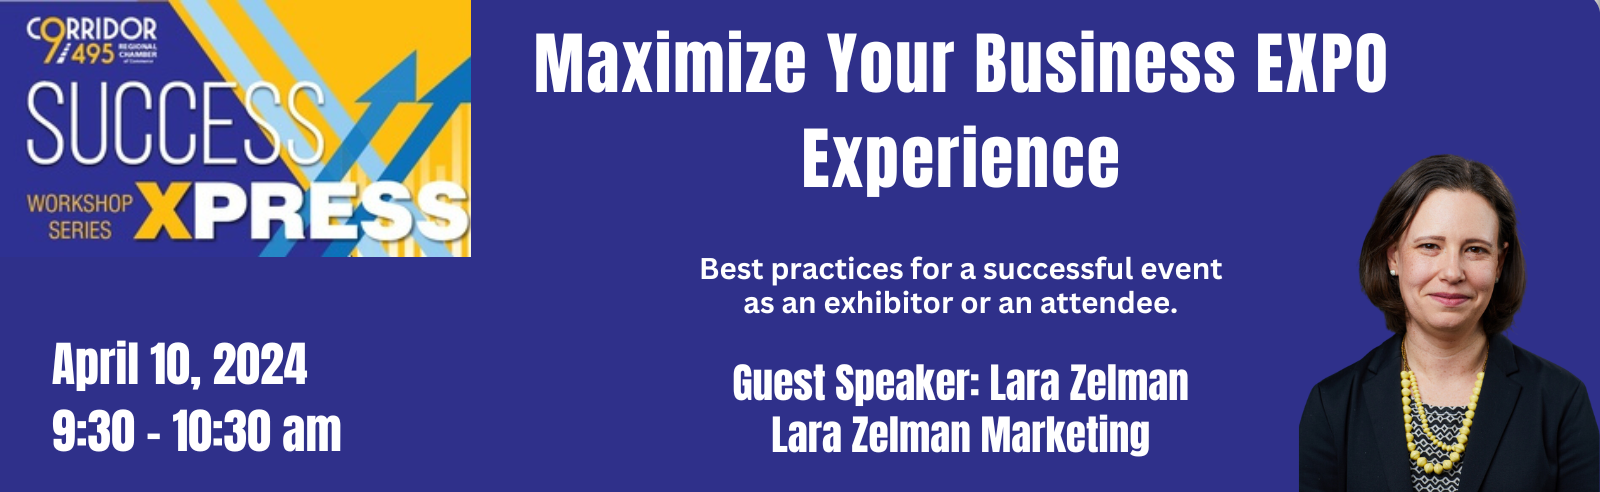 Web Maximize Your Business EXPO Experience